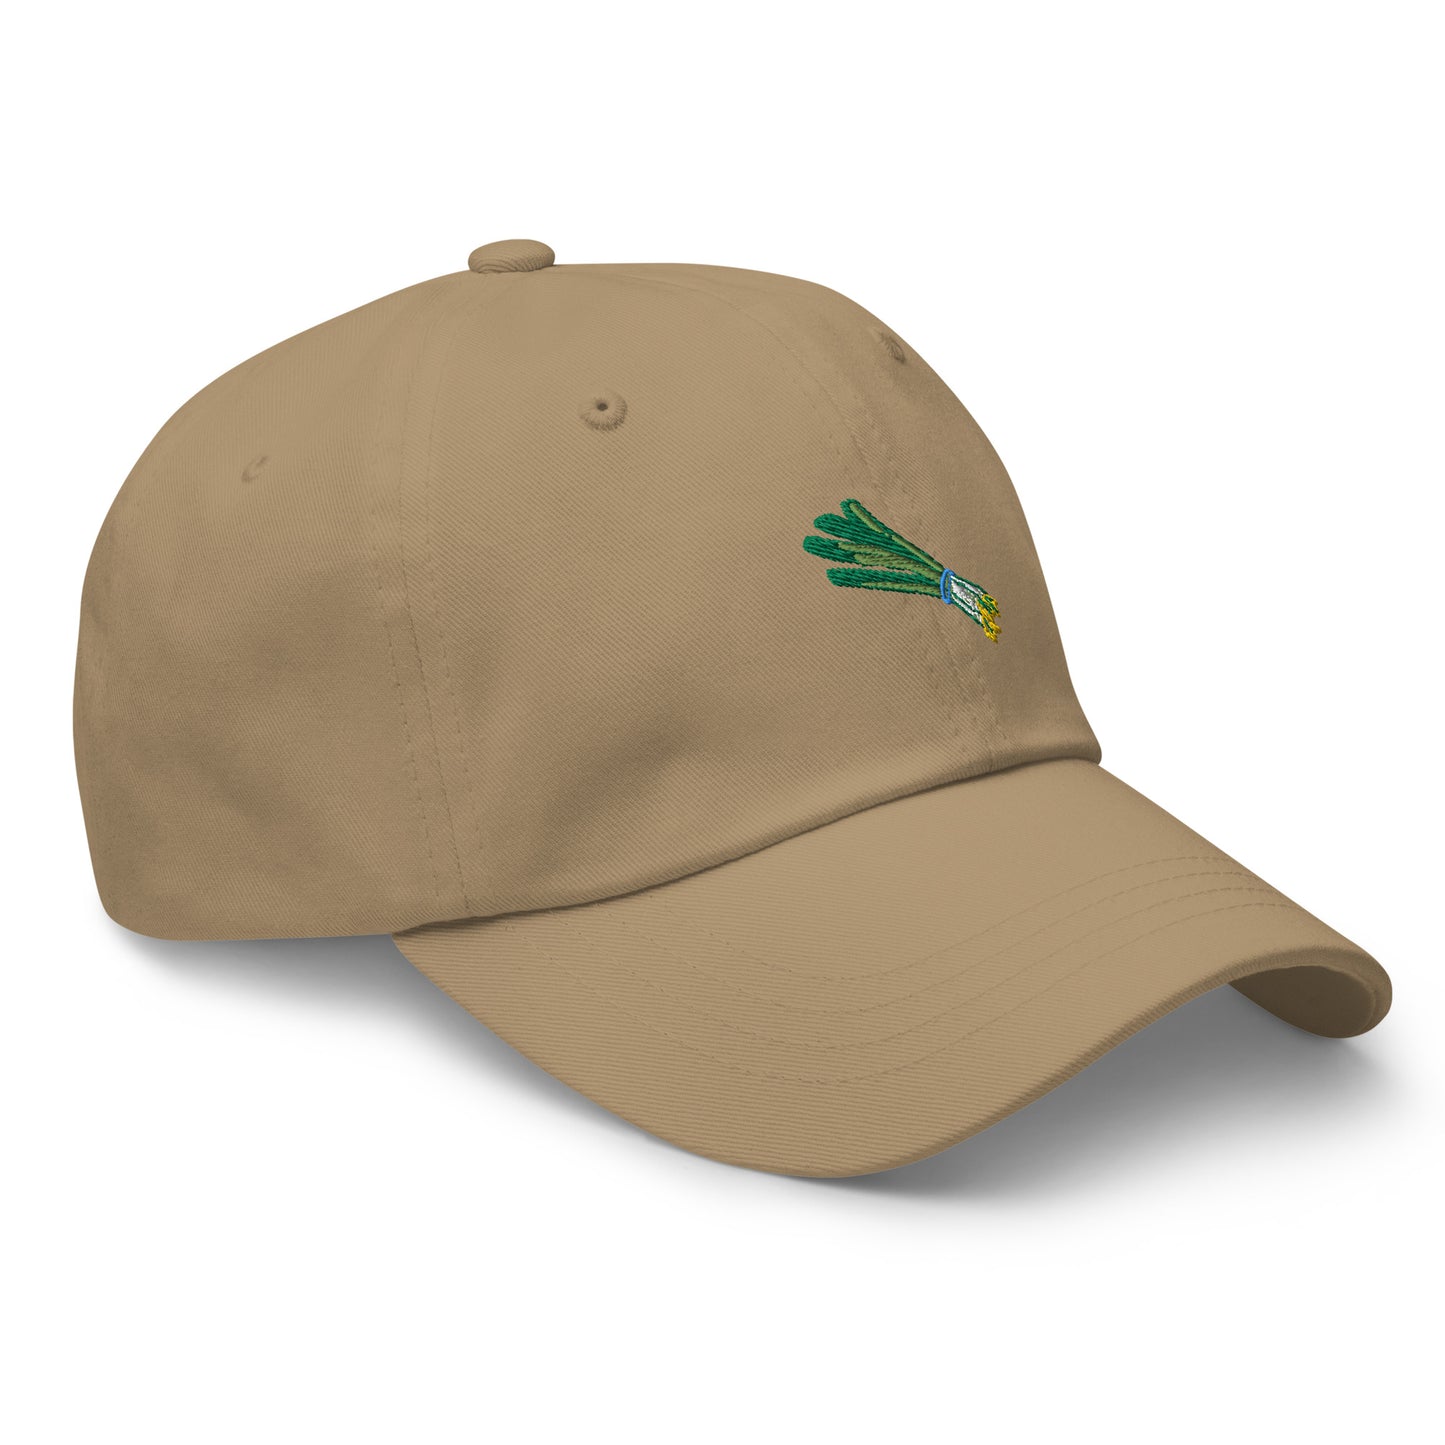 Green Onion Embroidered Dad Hat | Multiple Hat Sizes Available!